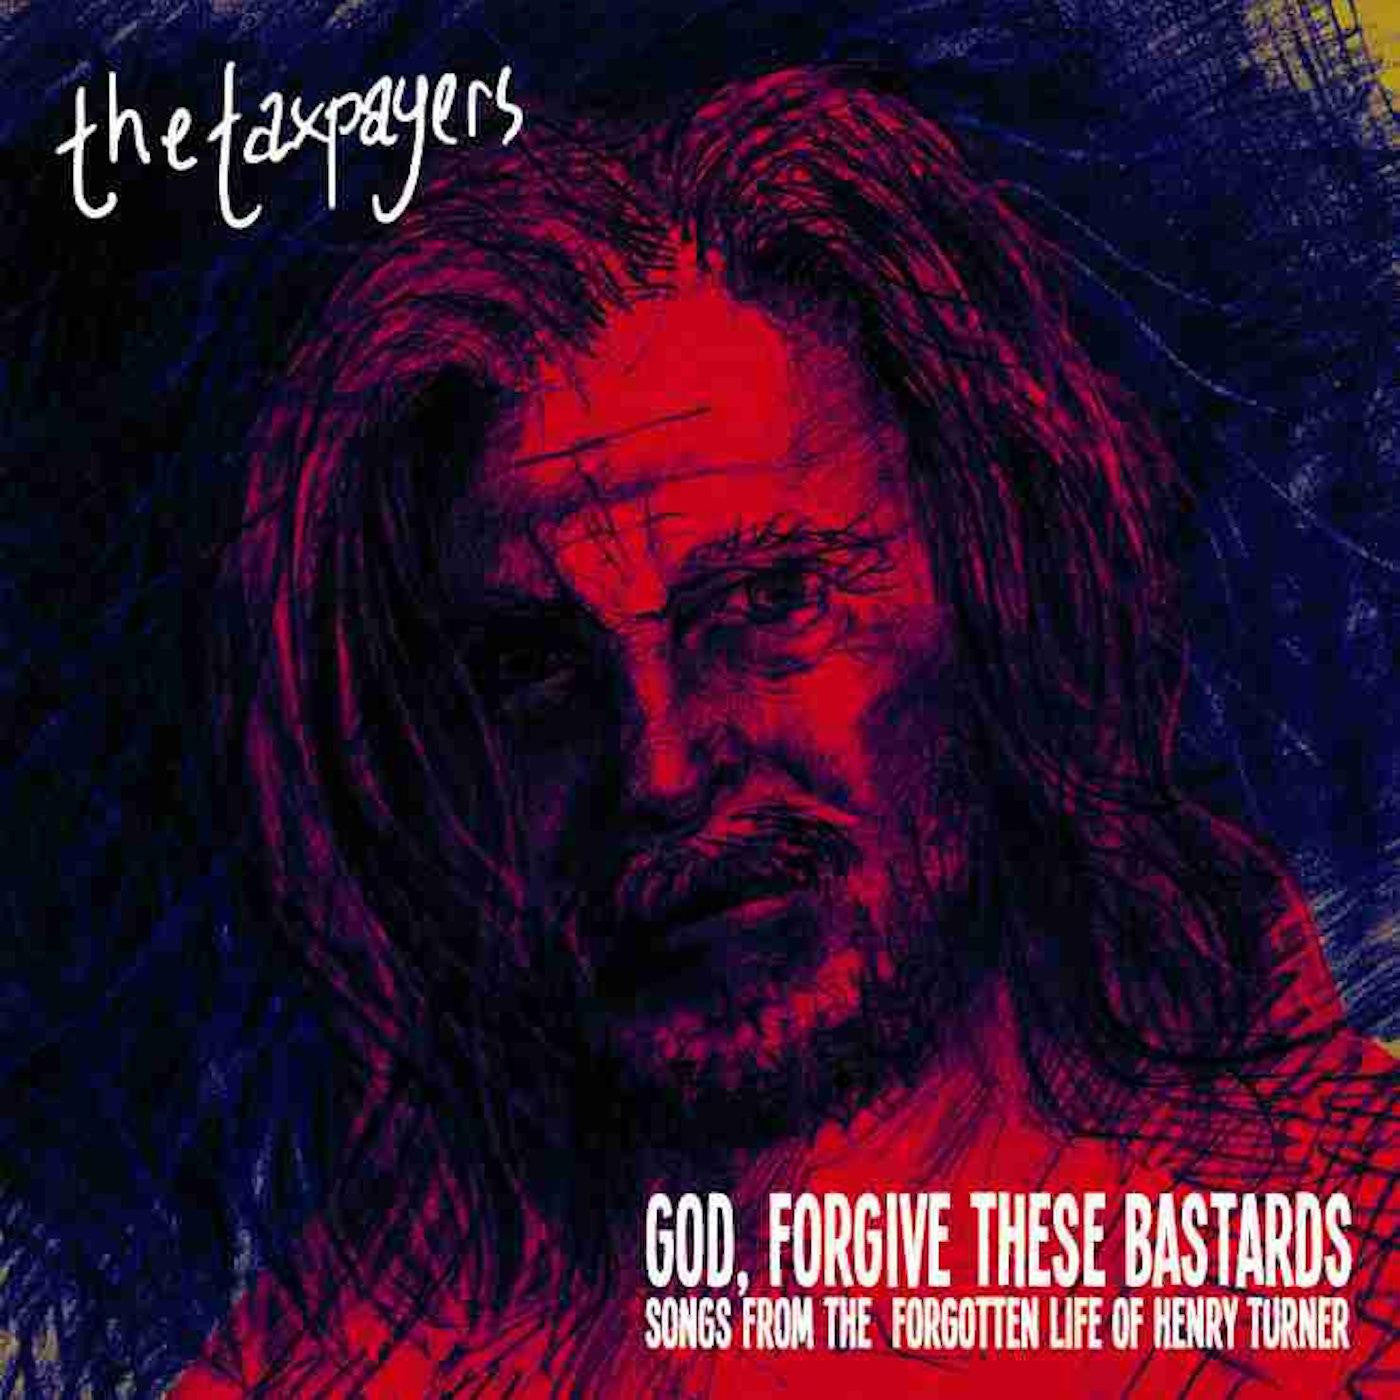 The Taxpayers - "God, Forgive These Bastards" Songs From The Forgotten Life Of Henry Turner [Yellow Transparent Vinyl]